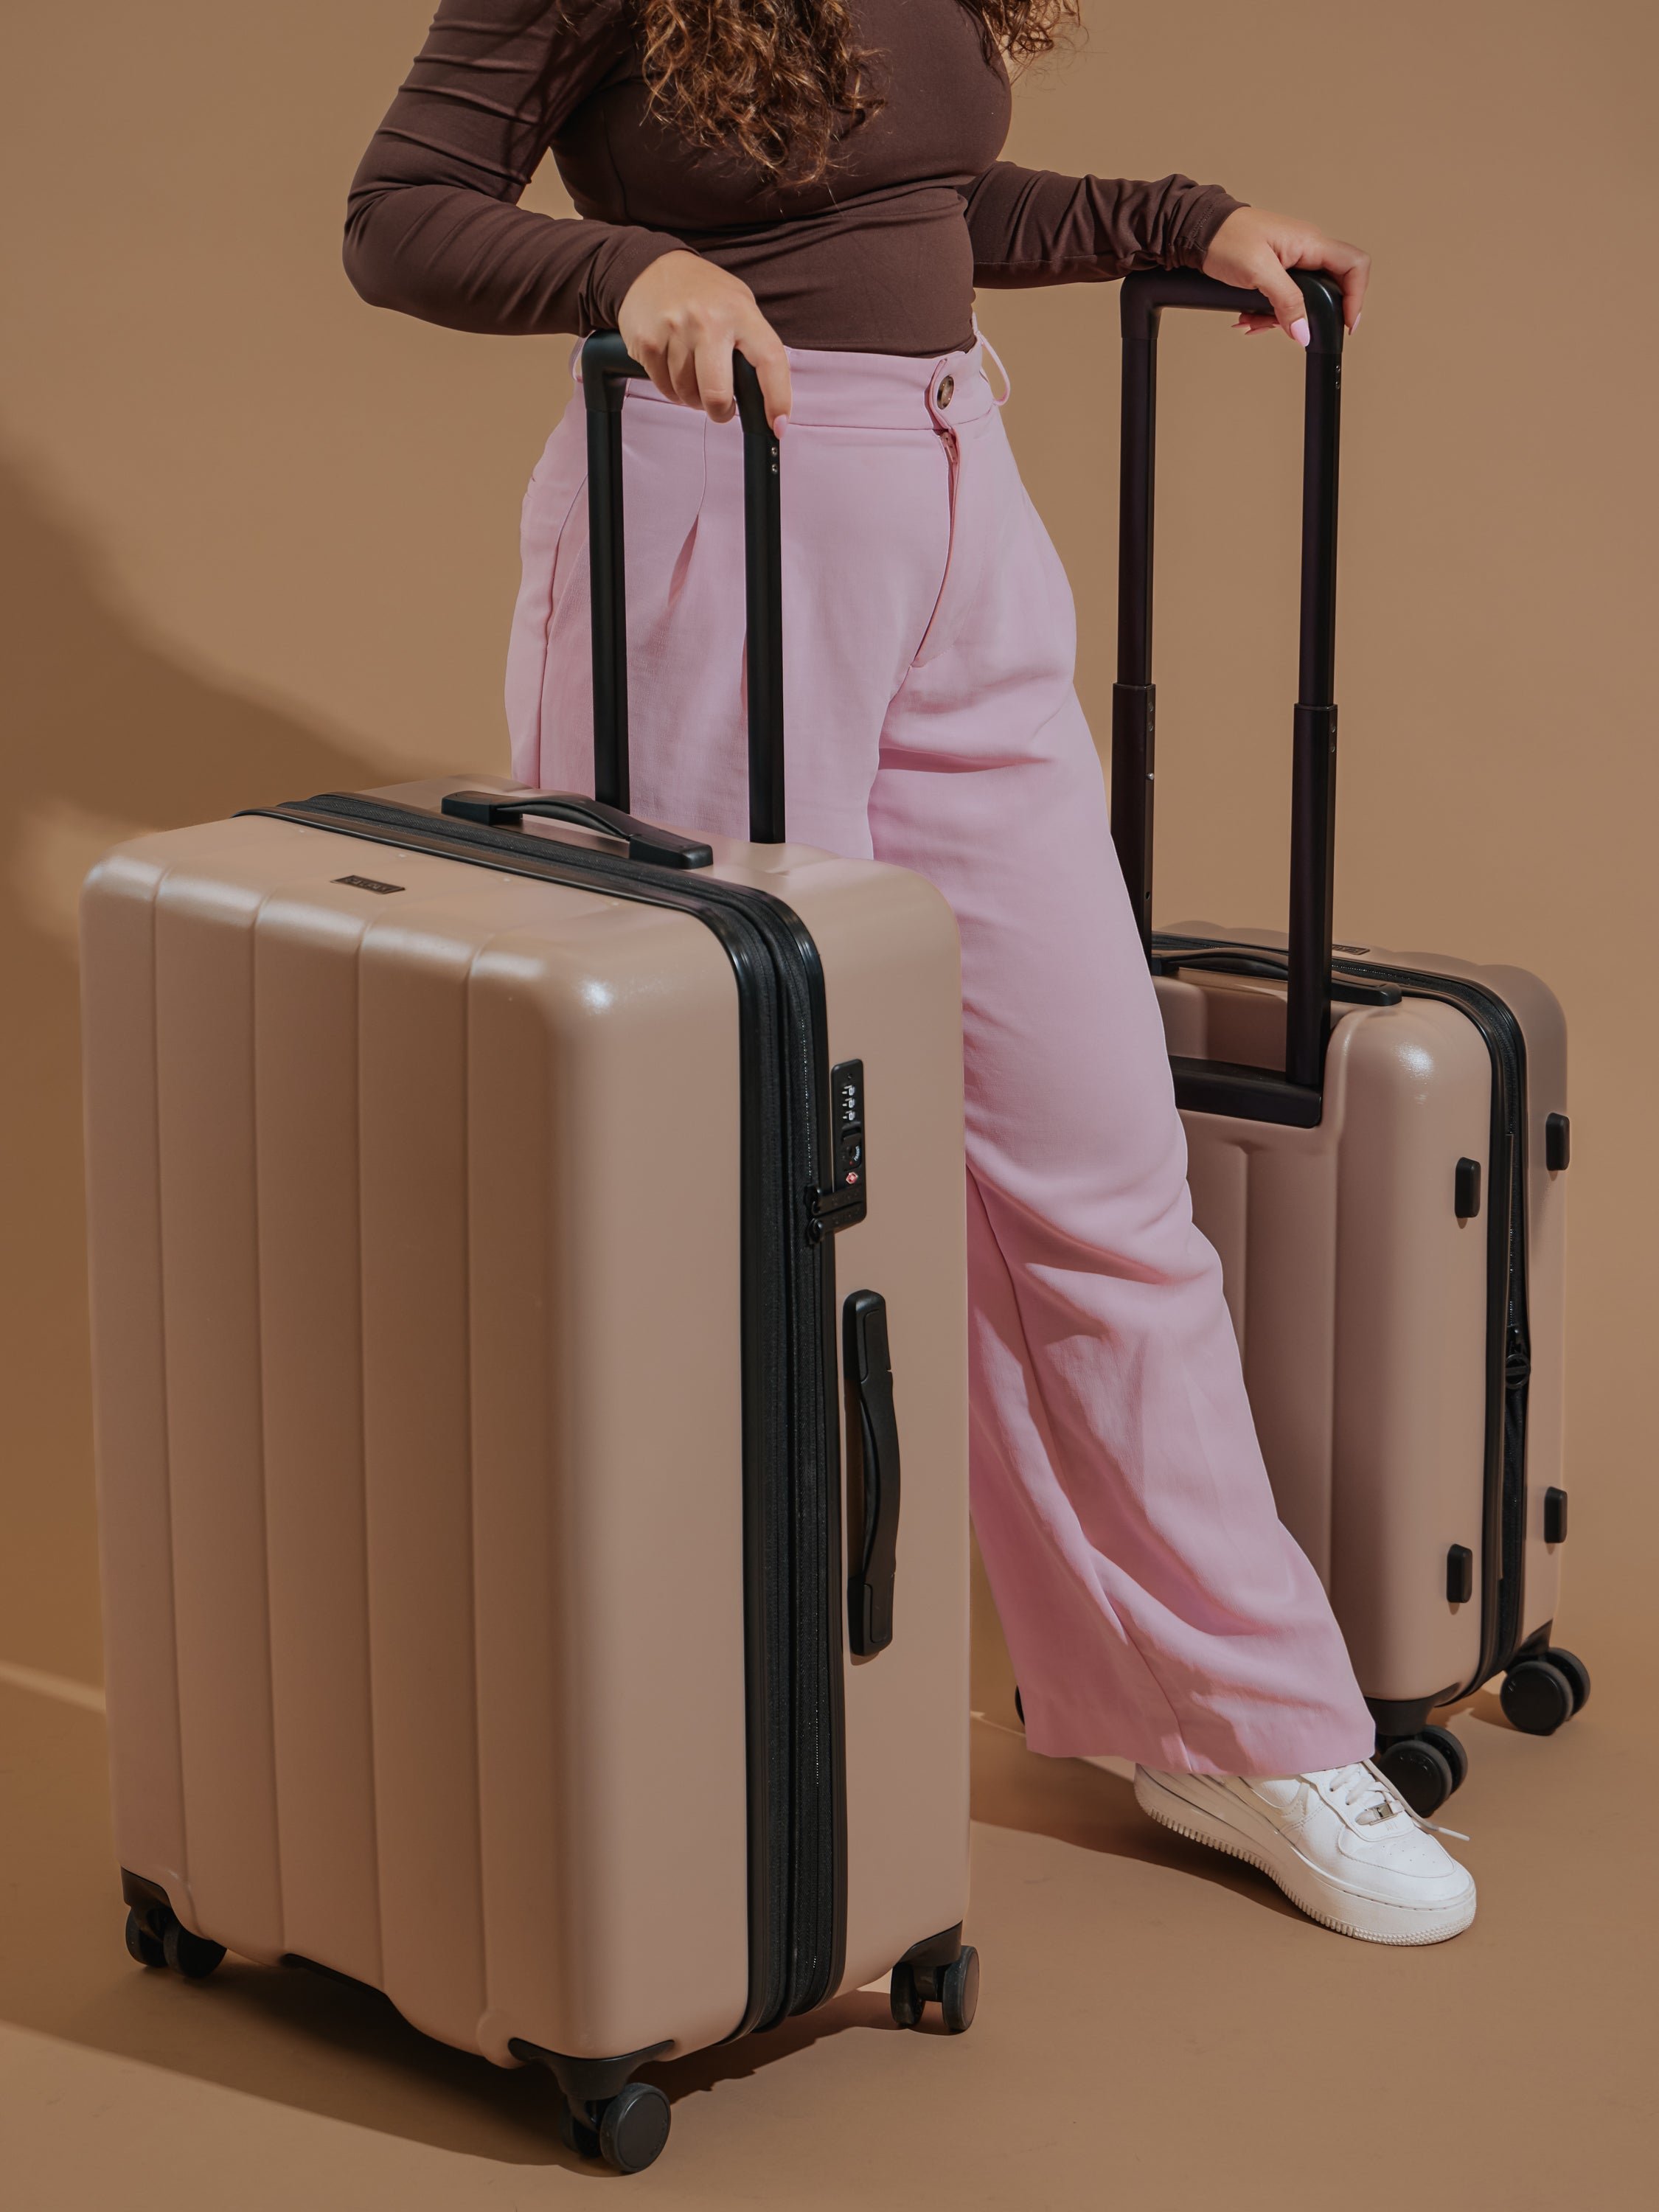 Model standing besides CALPAK Evry Large Luggage and CALPAK Carry-On Luggage in brown